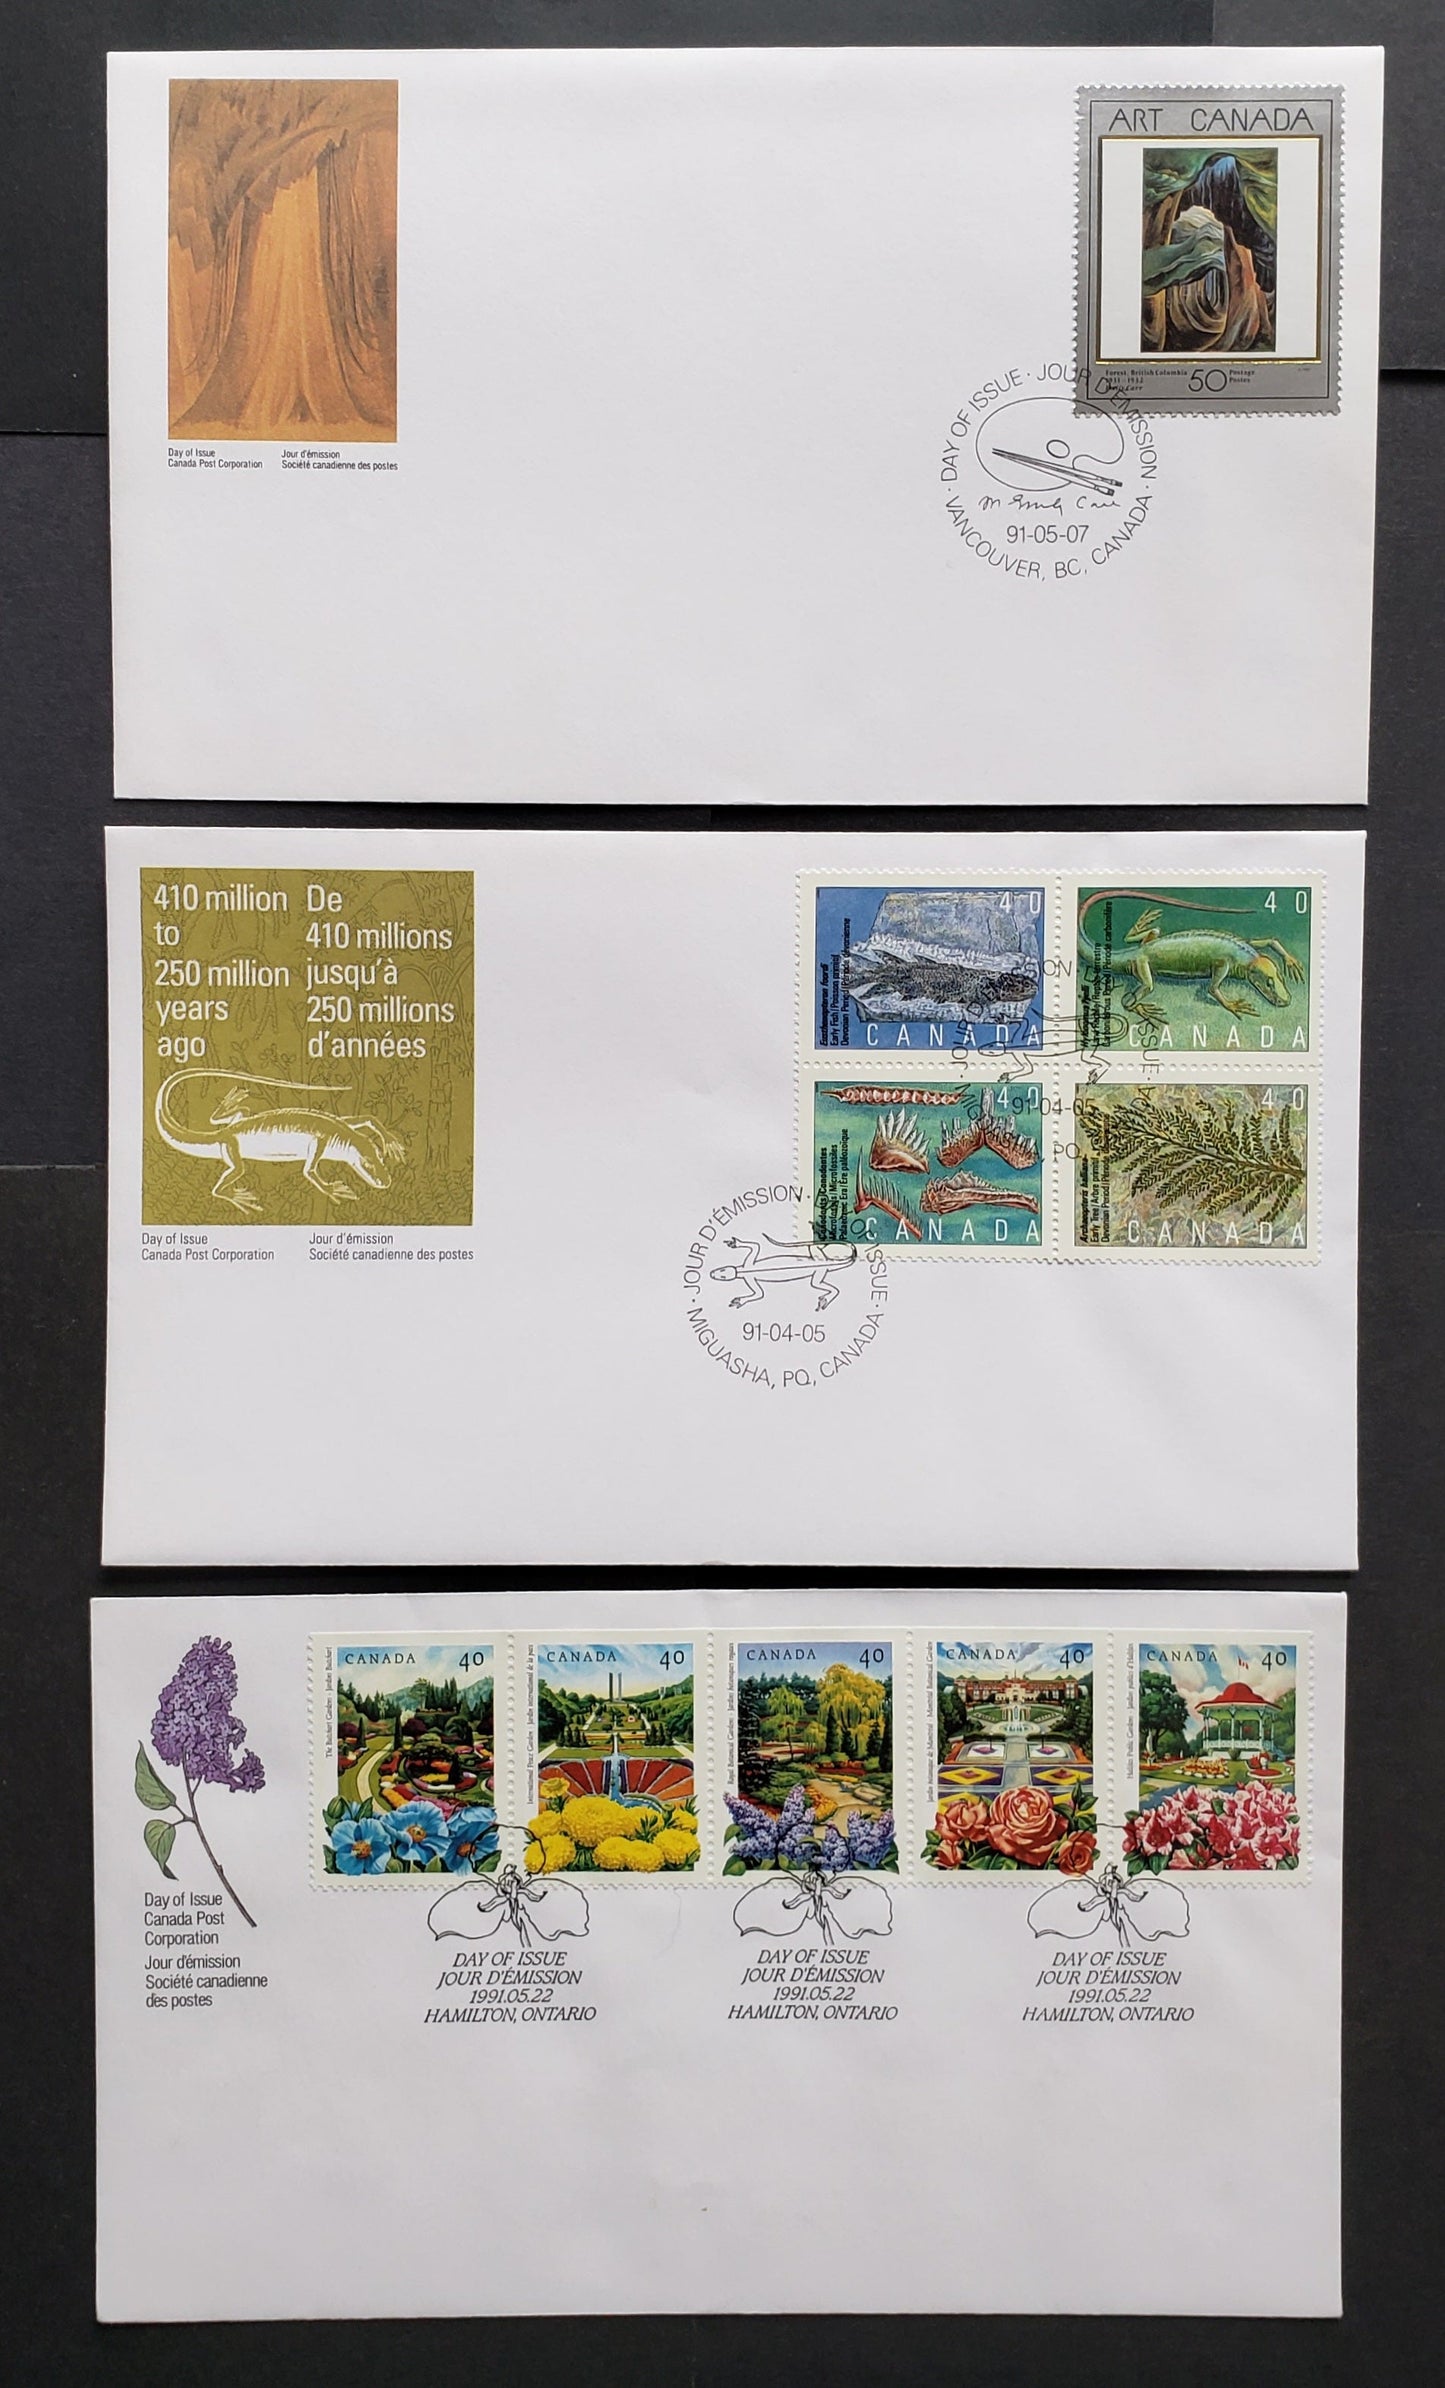 Lot 99 Canada #1309a, 1310, 1315a 40c & 50c Multicolor 1991 Prehistoric Life - Public Gardens, 3 Canada Post FDC's Franked With Single, Strip Of 5 & Block Of 4, Approx 40,000-50,000 Of Each Produced, Cat. Value $9.7